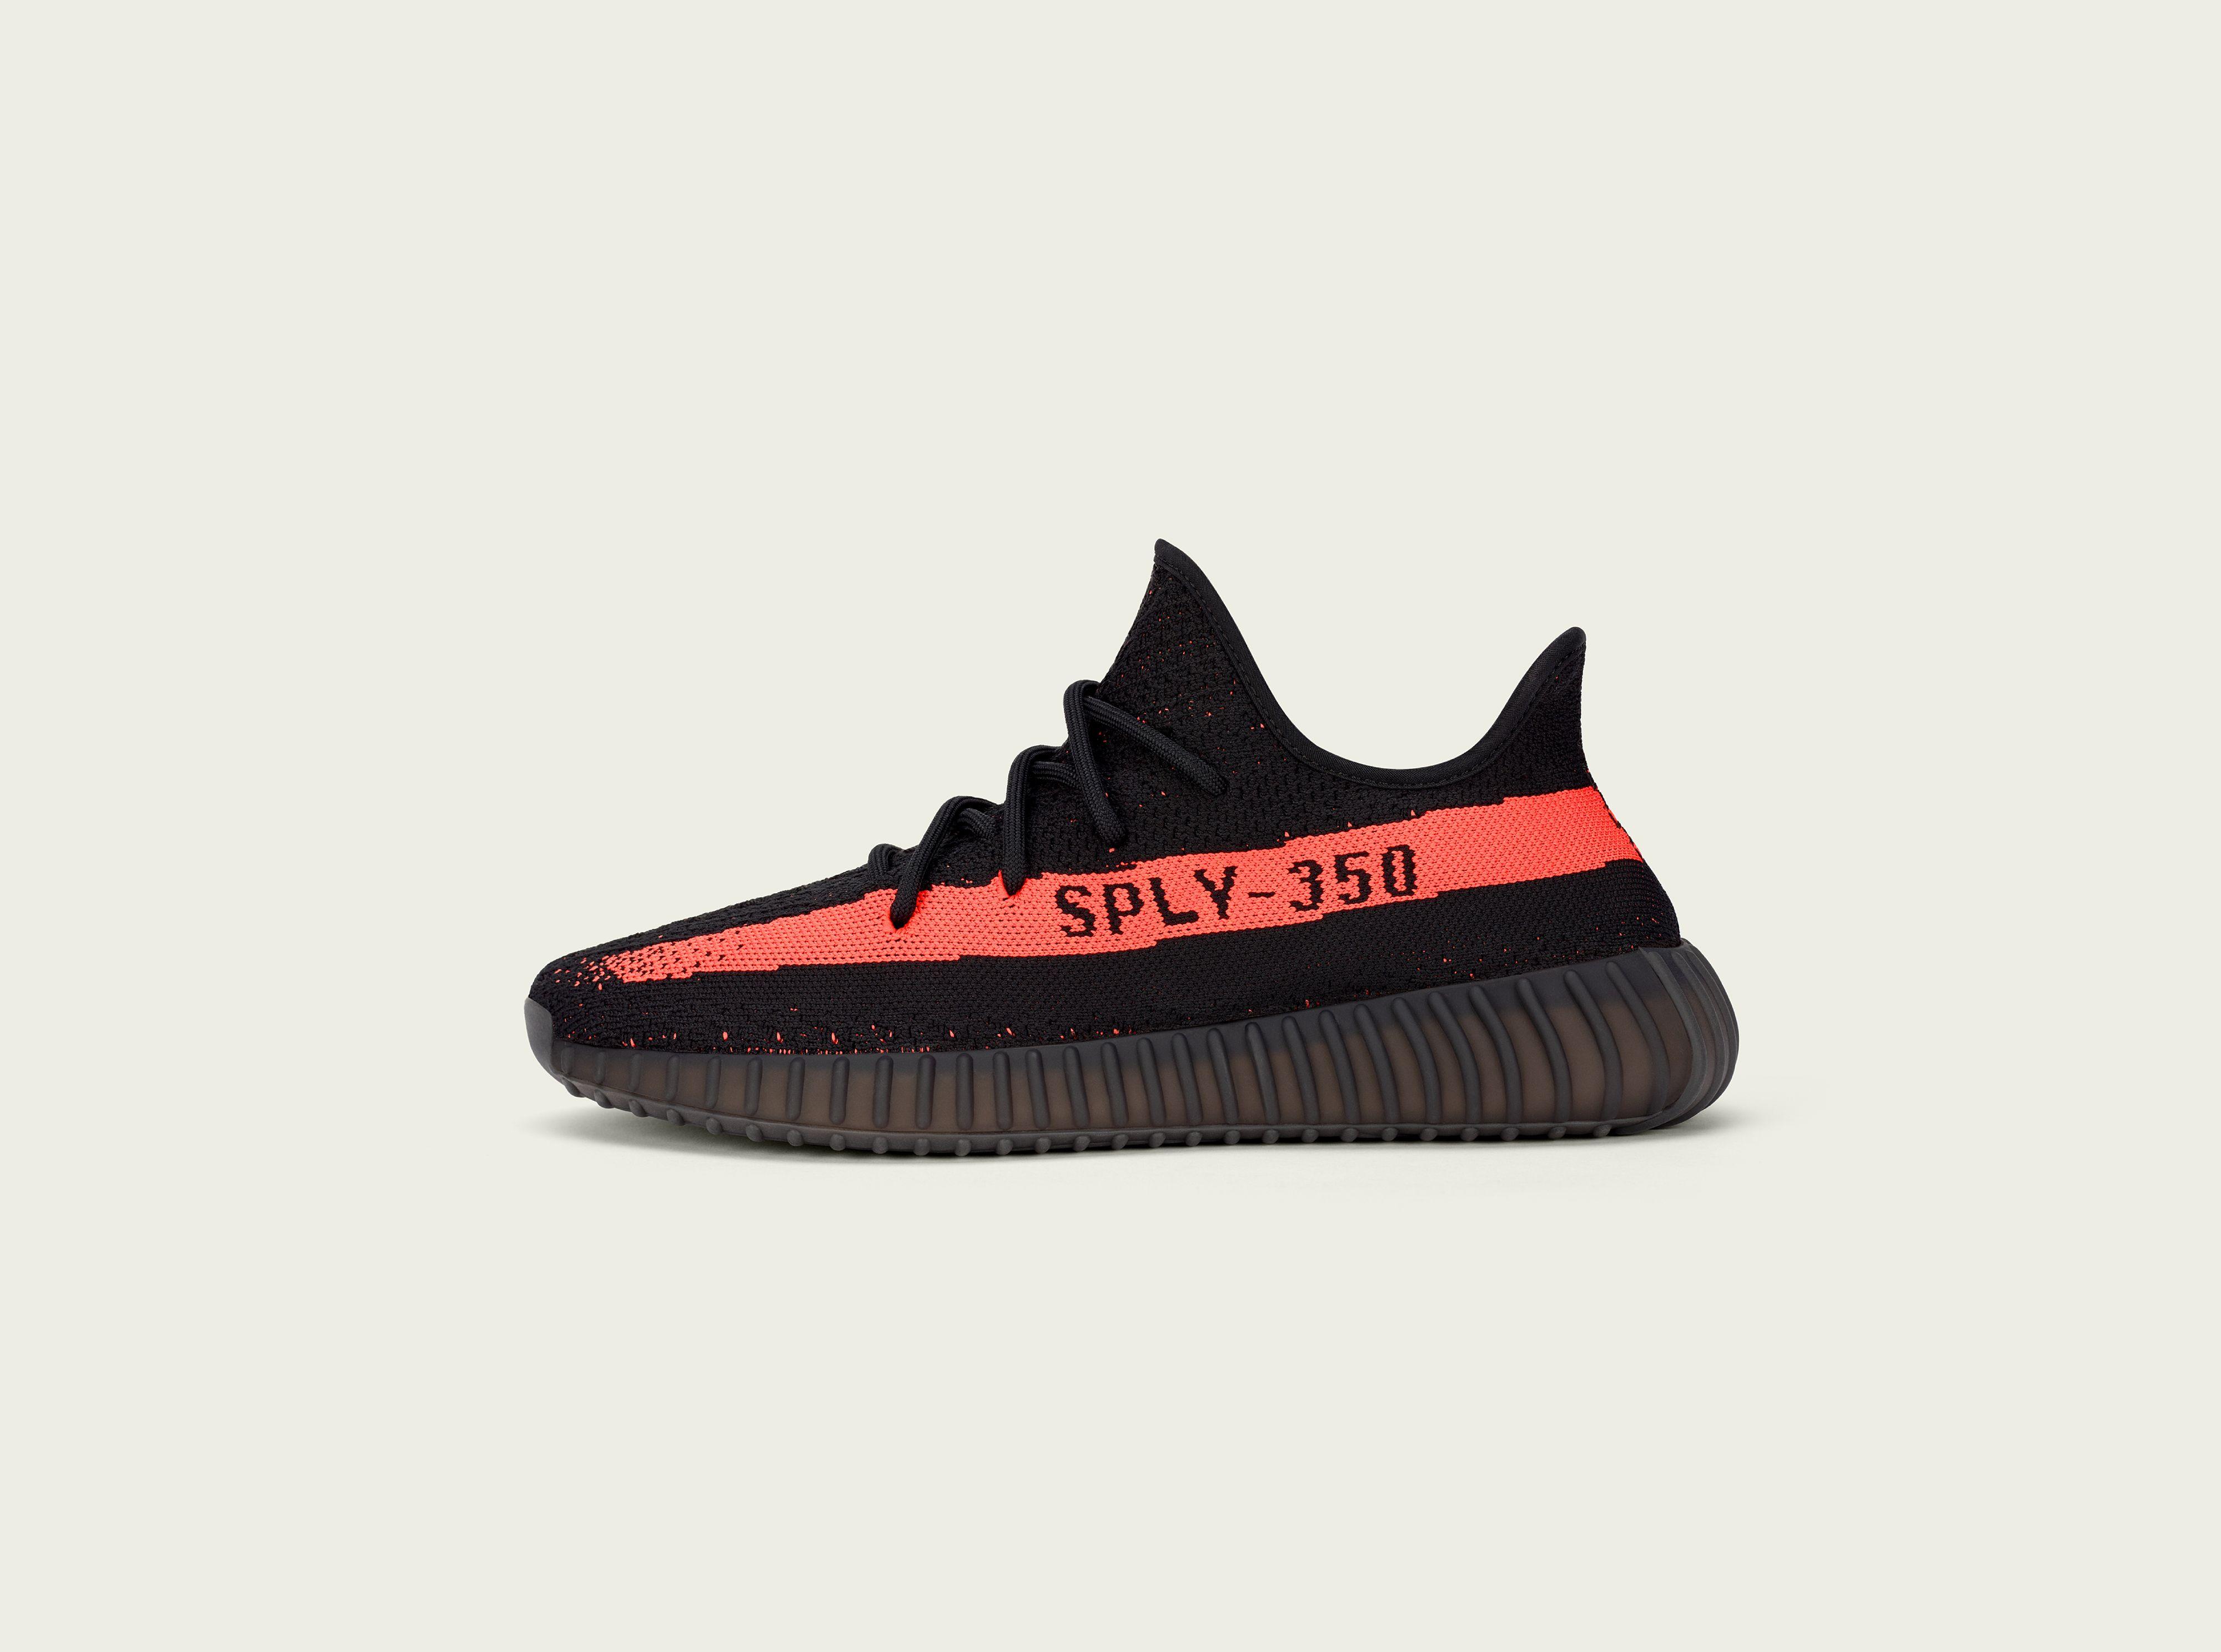 Adidas Yeezy Boost 350 V2 Wallpapers - Wallpaper Cave